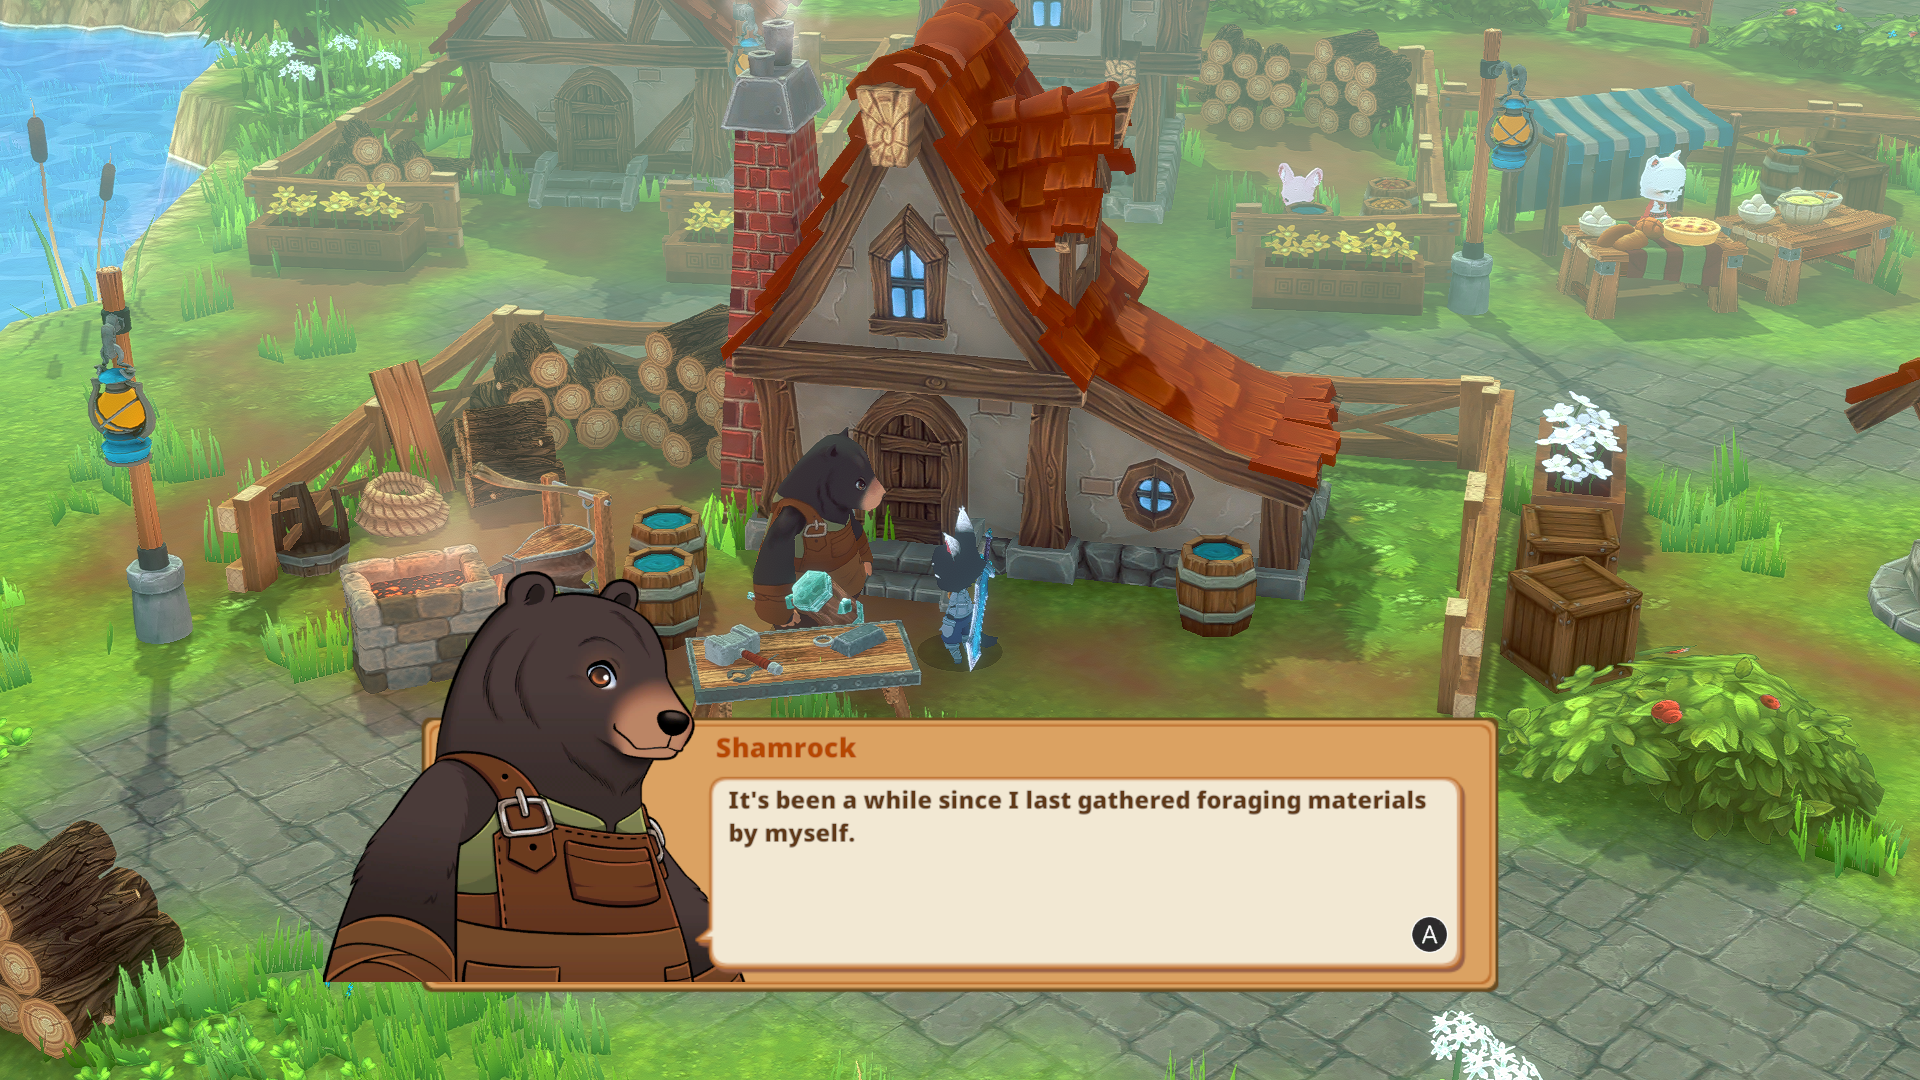 Screenshot of the Bear blacksmith saying it's been a while since he's foraged for materials